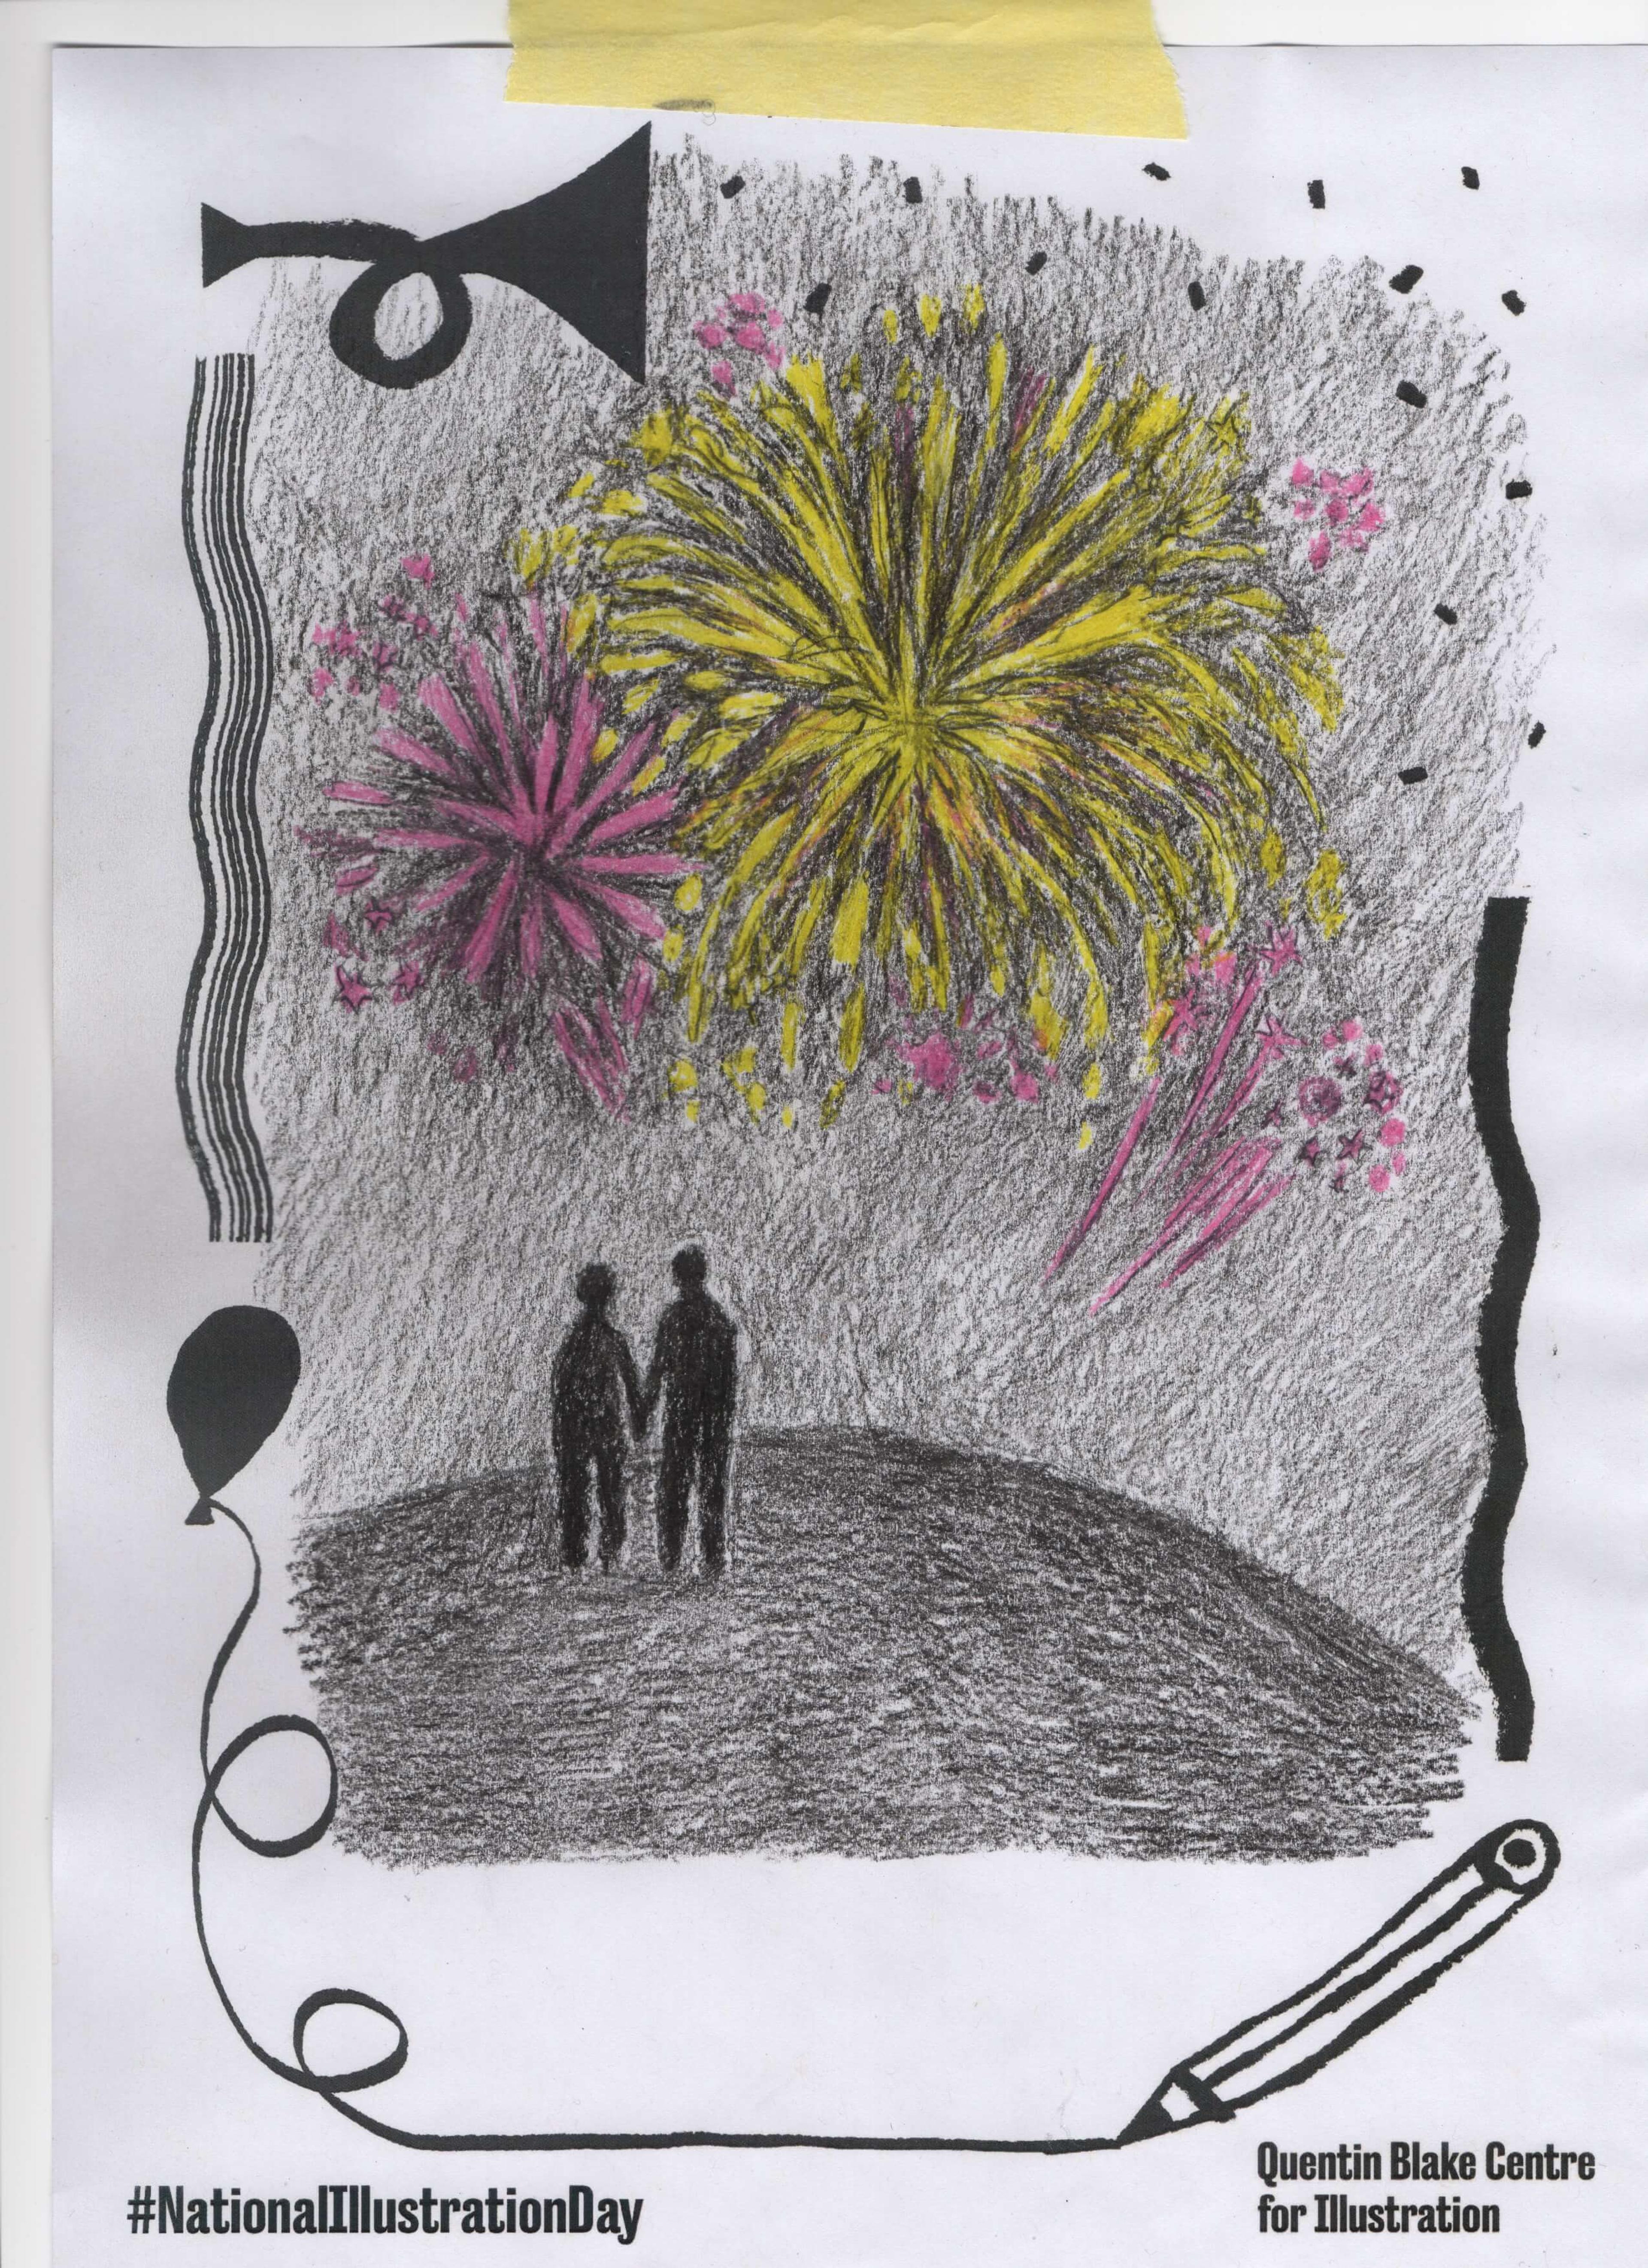 Full-colour coloured pencil illustration of two silhouettes looking up at the night sky illuminated by fireworks. 